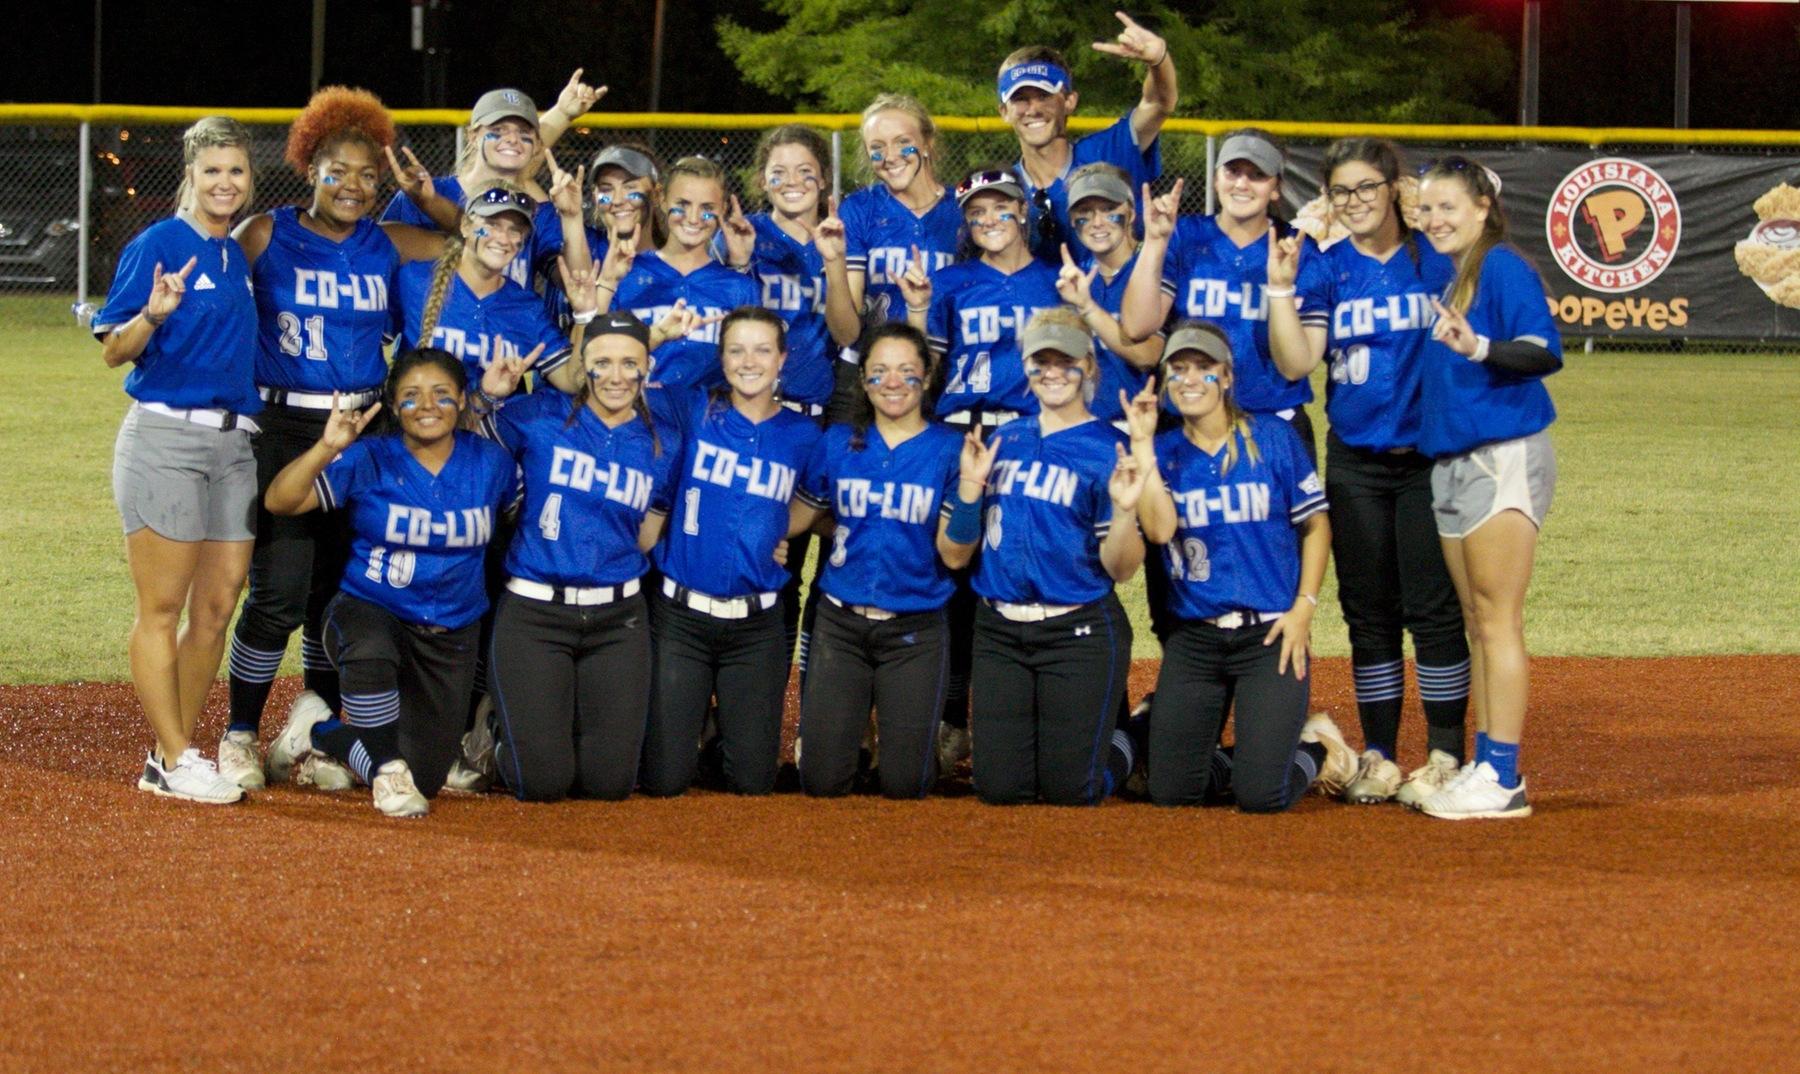 Co-Lin downs defending national champions